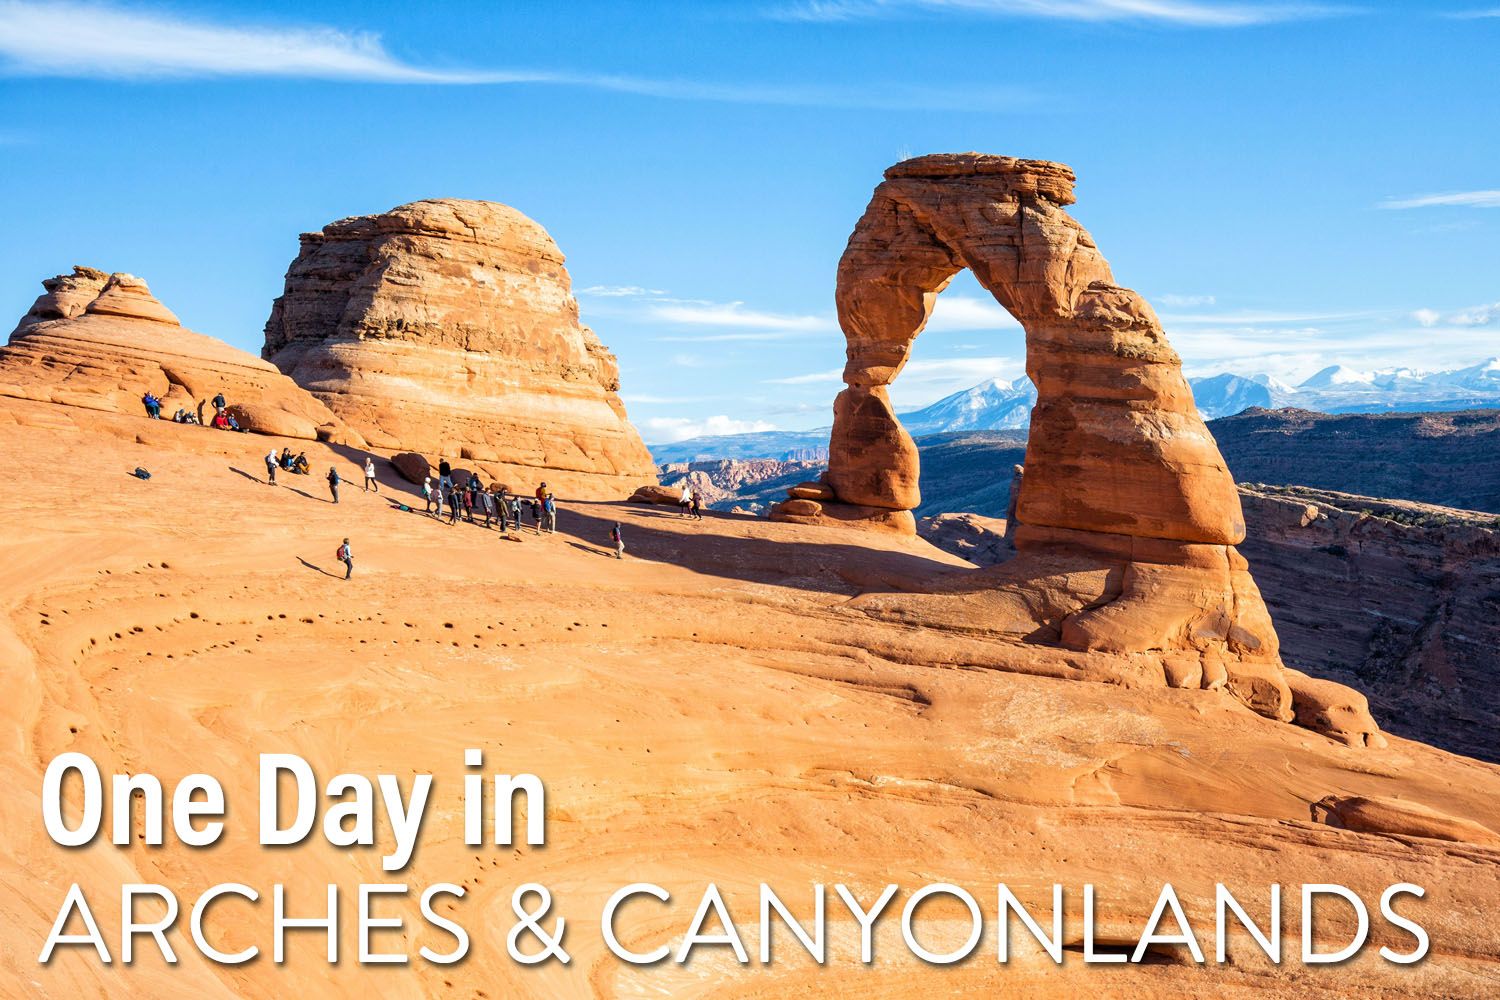 One Day Arches Canyonlands Itinerary